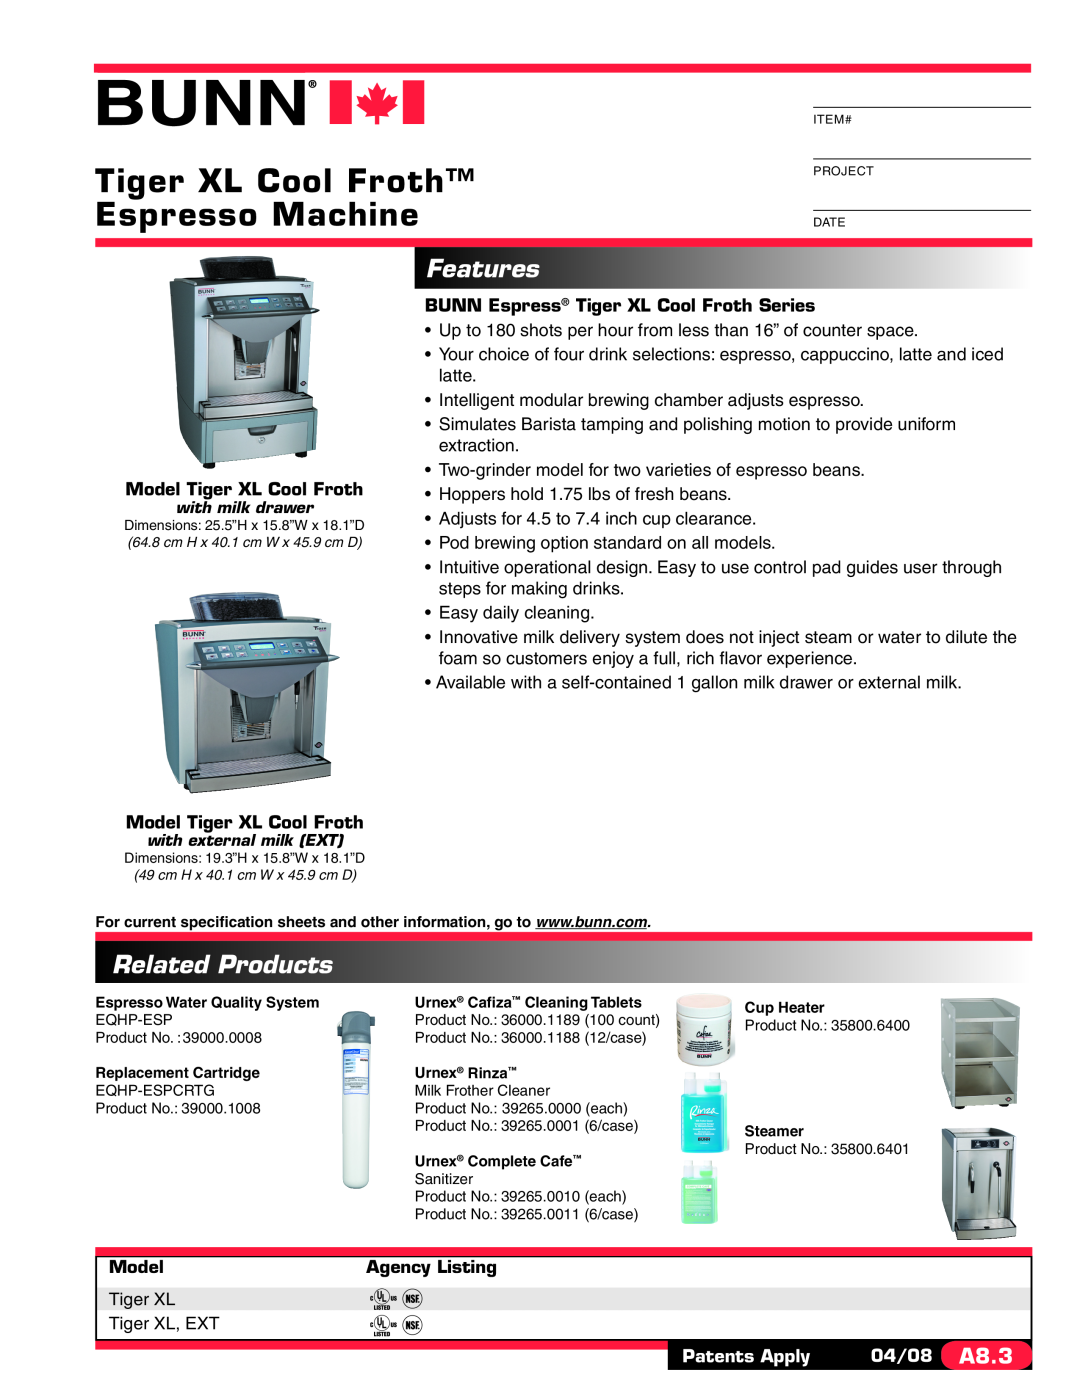 Bunn XL EXT specifications Features, Related Products, Tiger XL Cool Froth Espresso Machine, Patents Apply, 04/08 A8.3 